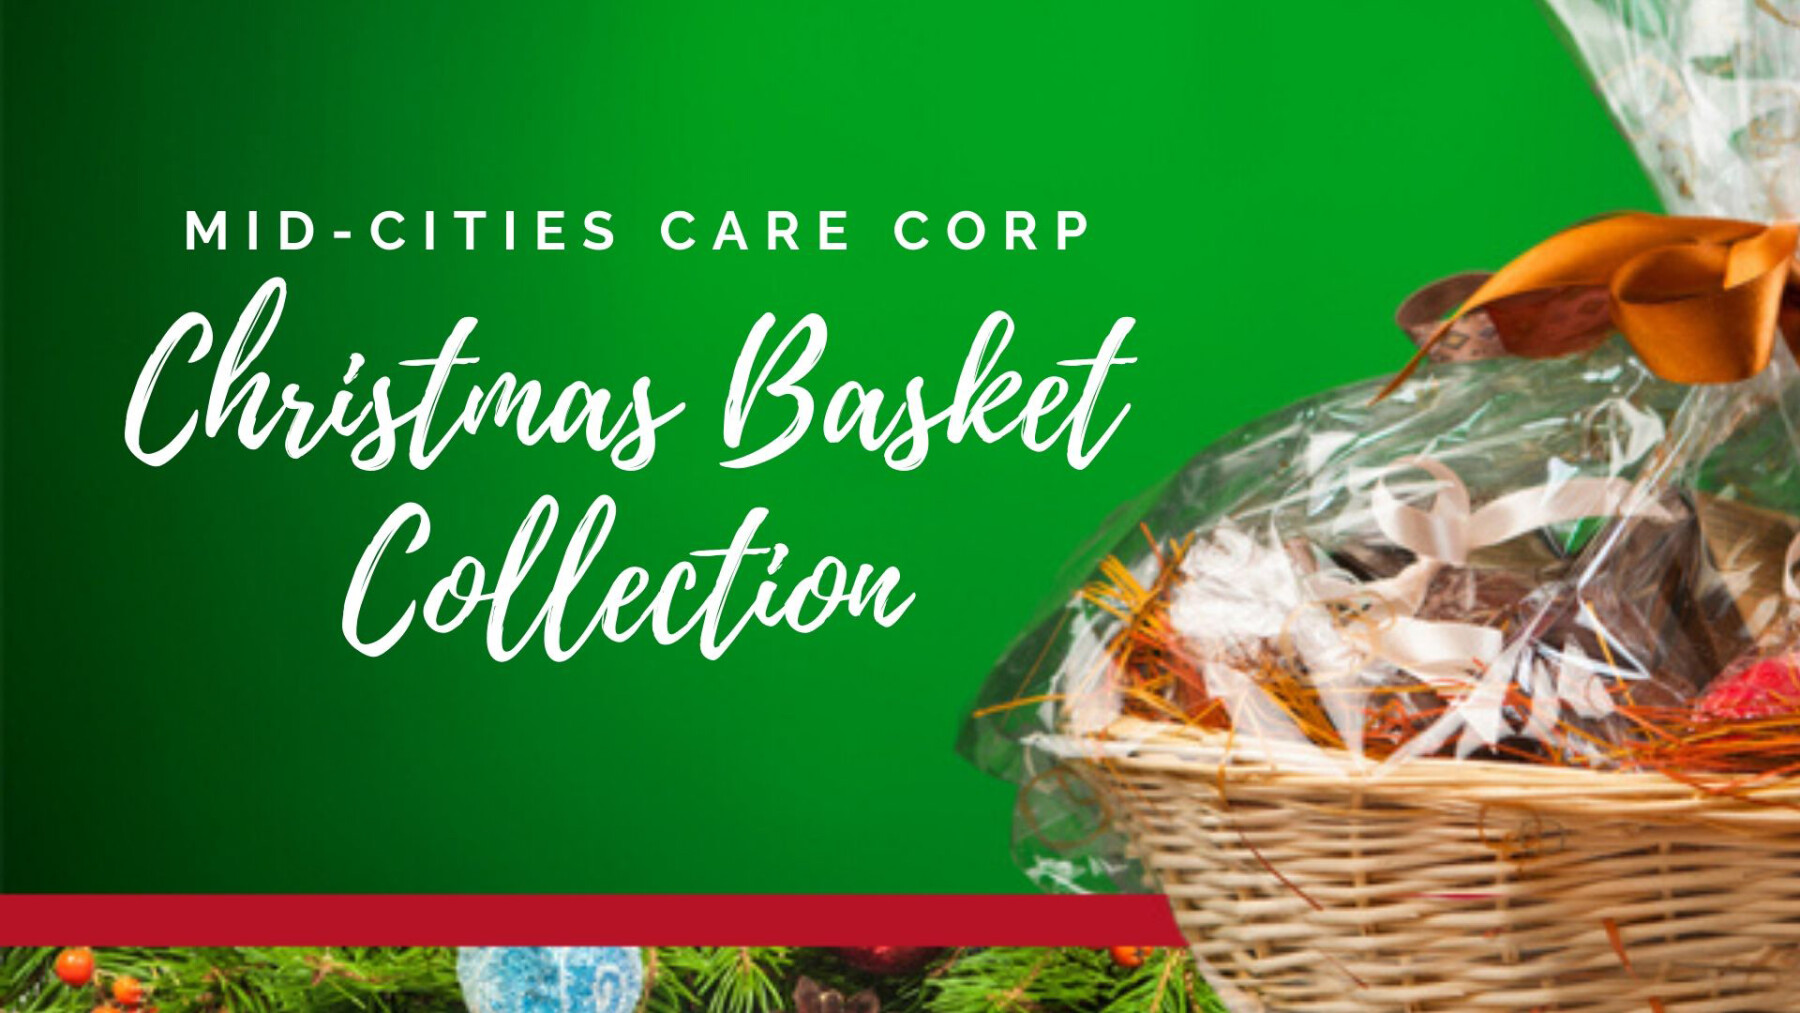 Mid-Cities Care Corp Christmas Basket Collection due date